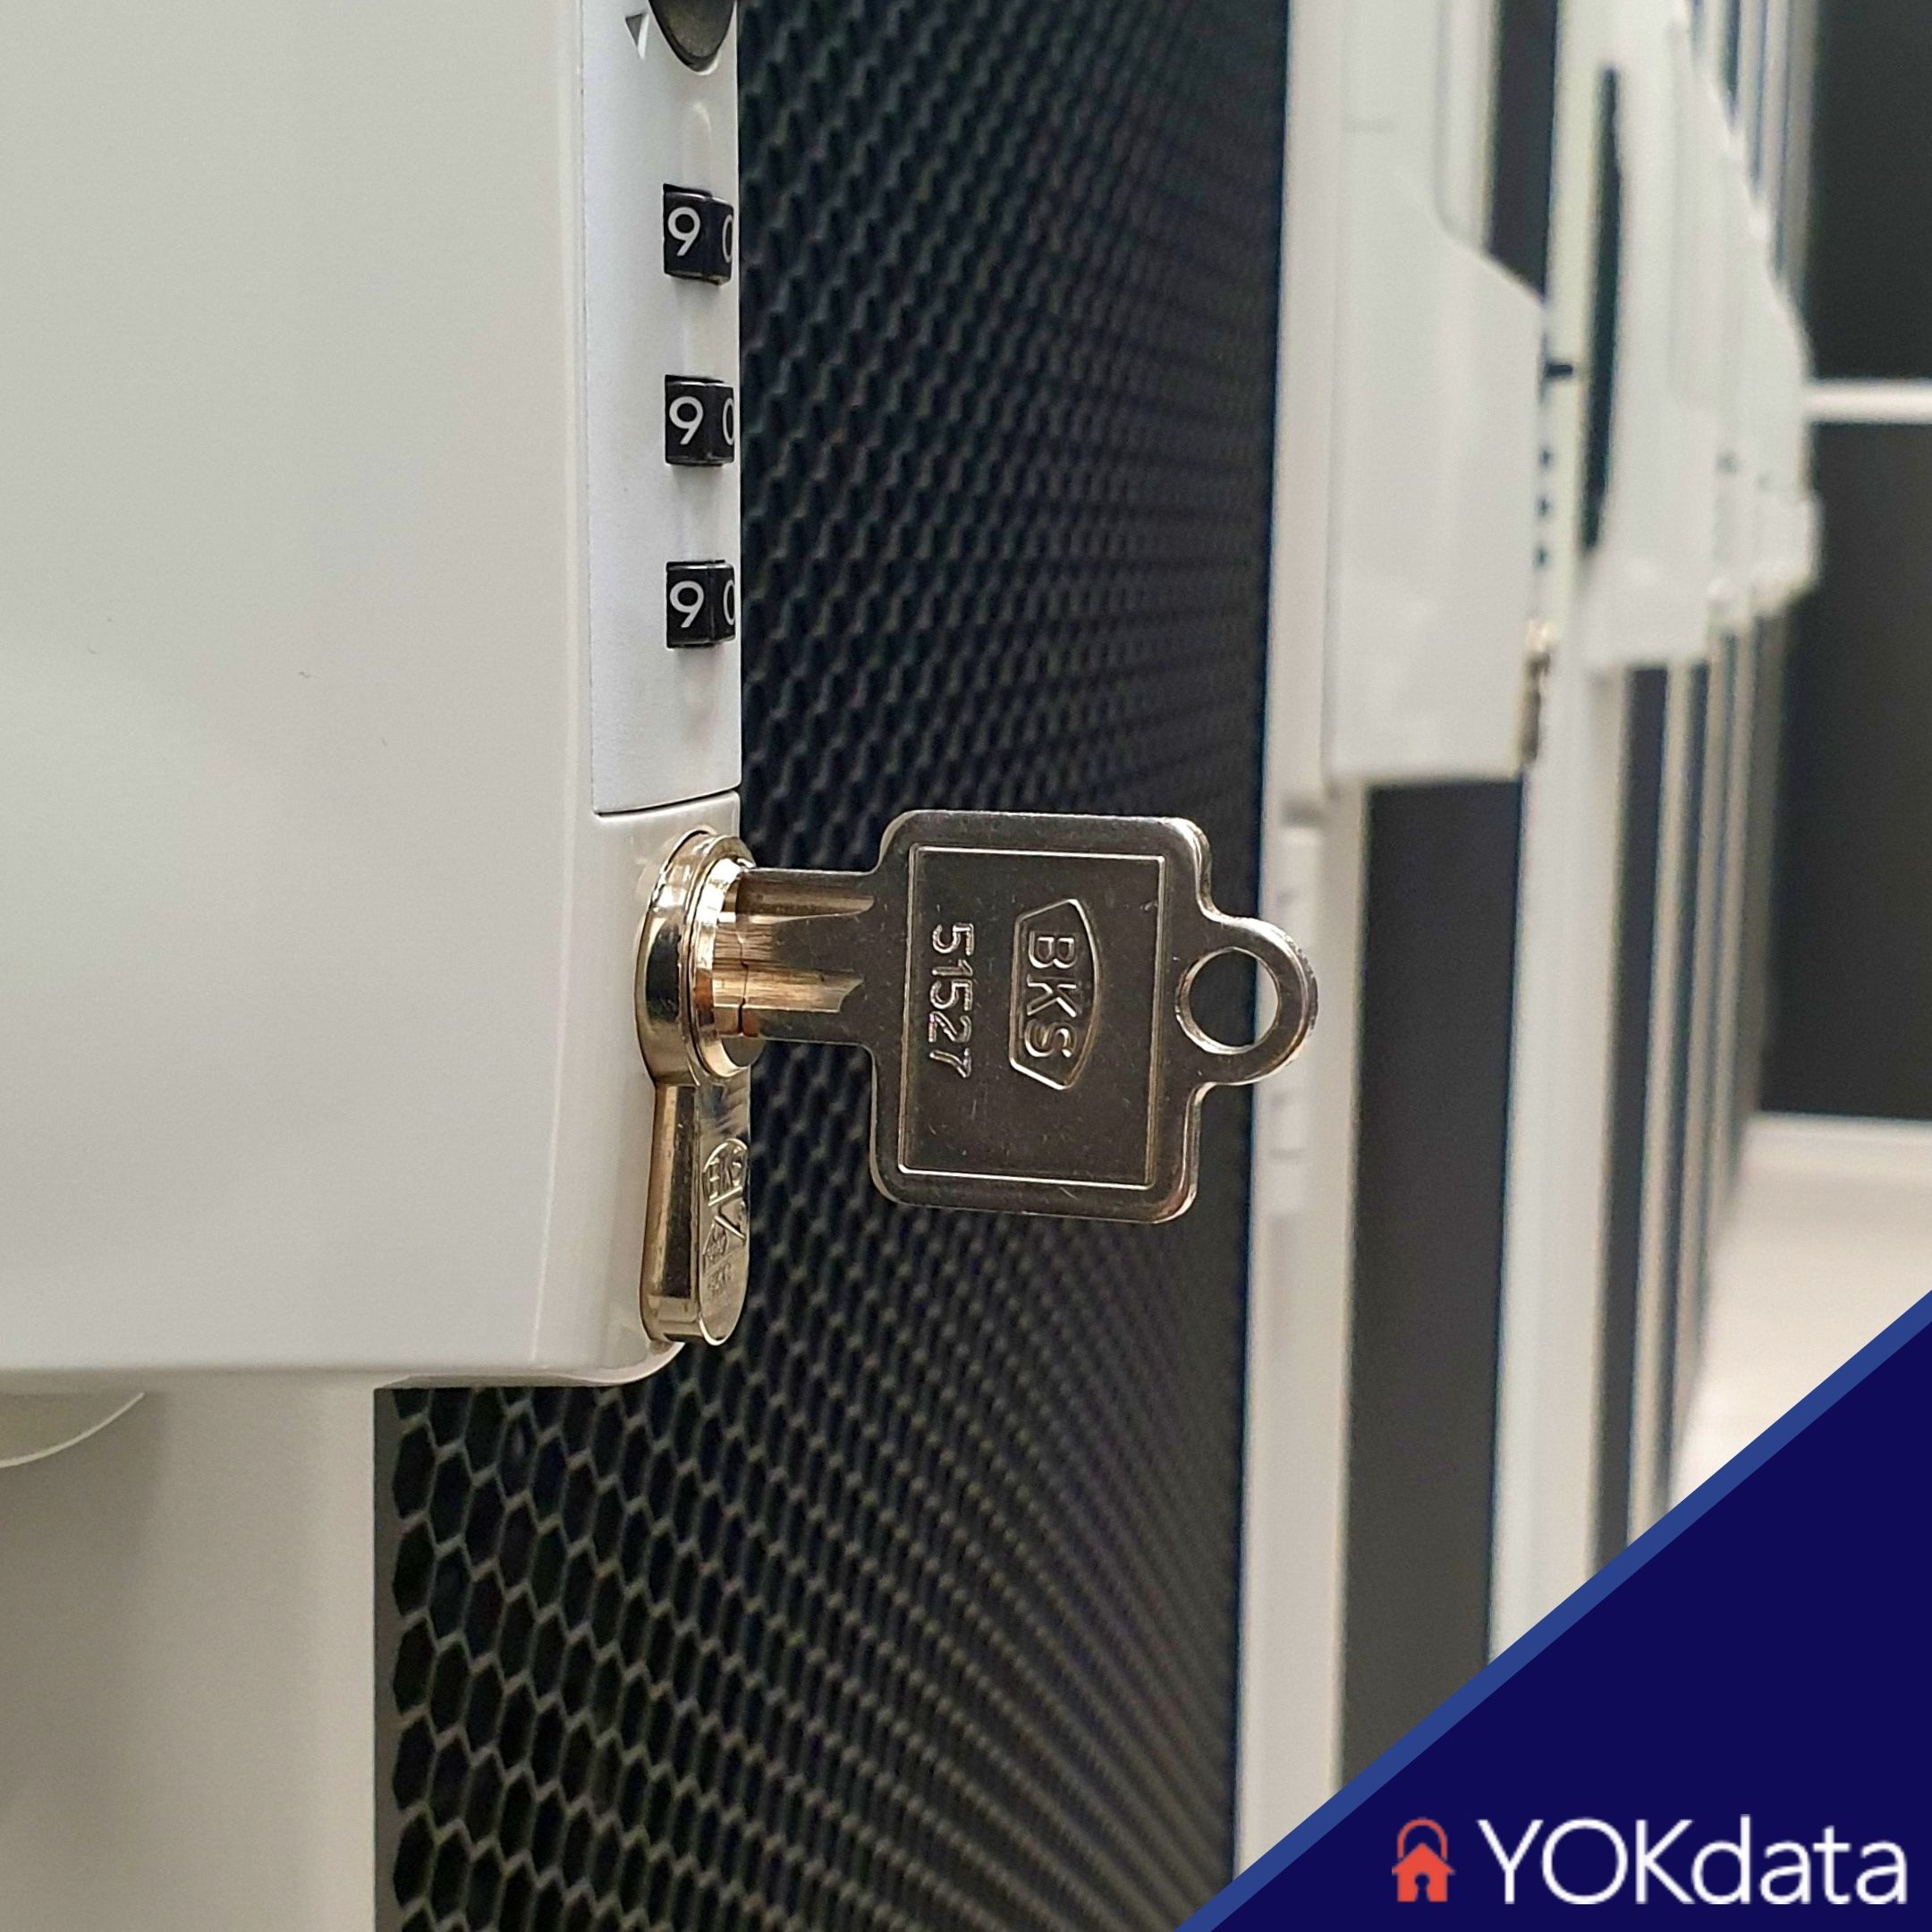 YOKdata against proposed Lawful Access to Encrypted Data Act